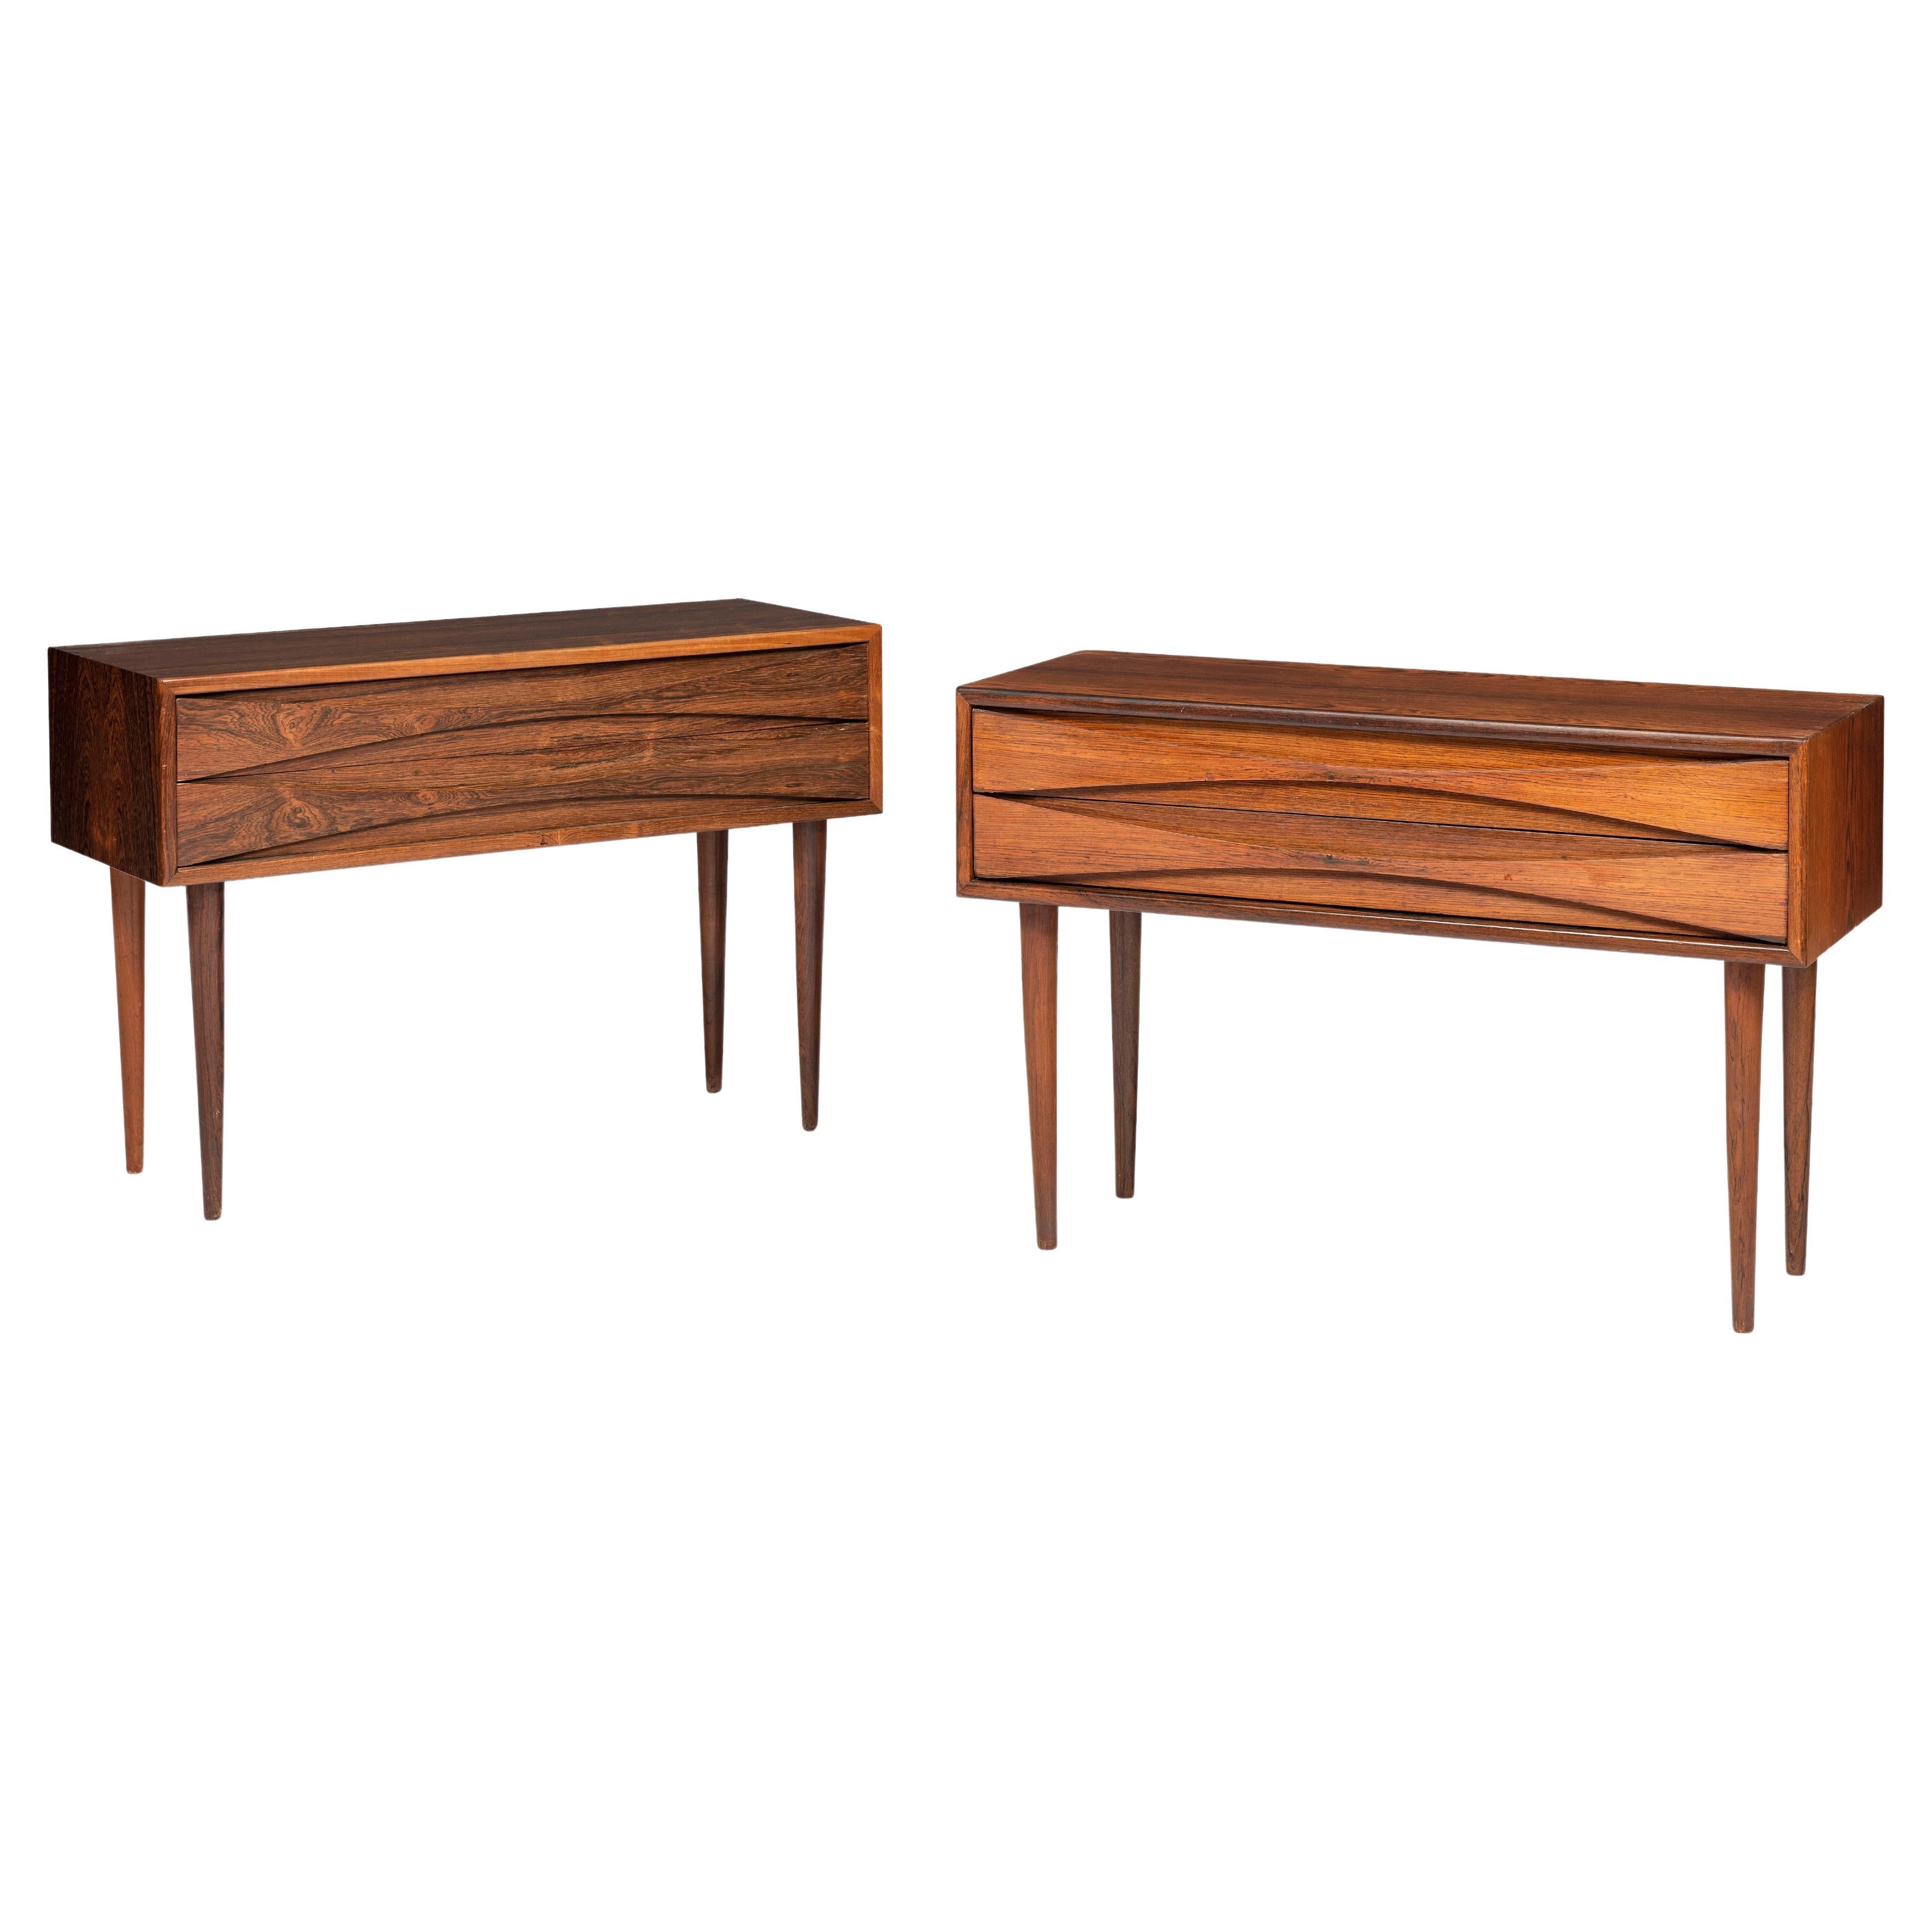 Pair of Swedish Modern Night Stands by Niels Clausen, 1960's For Sale